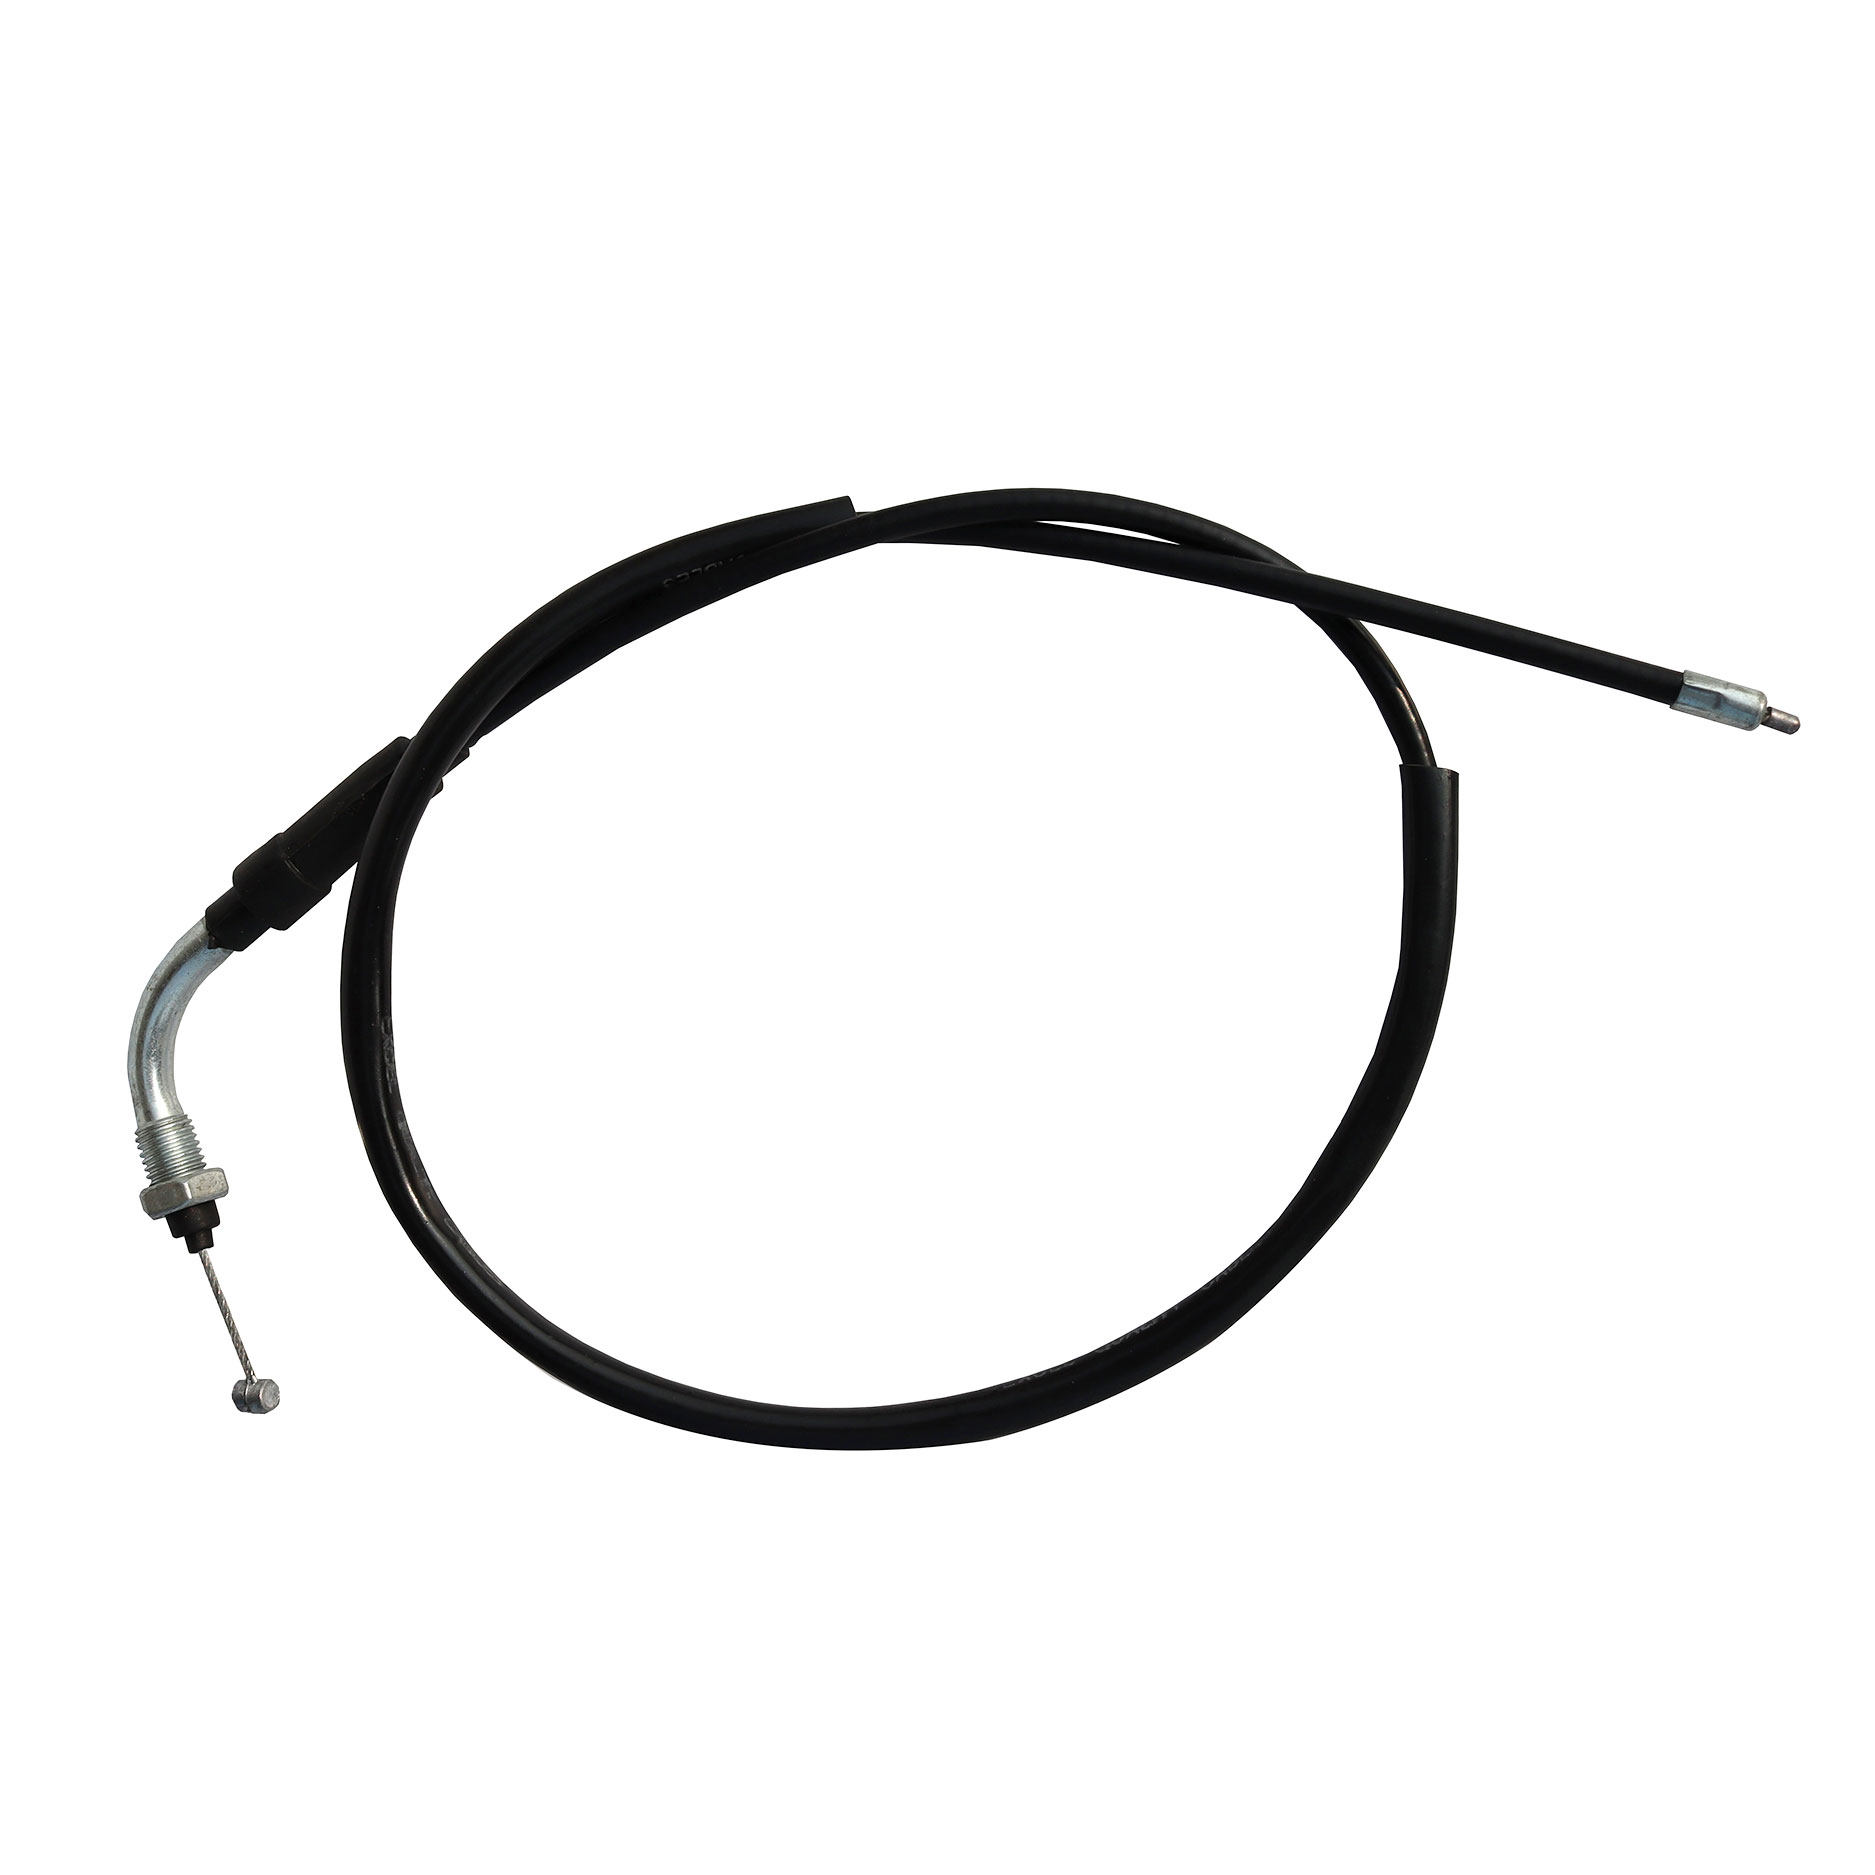 Race-Cable-CD70-Euro